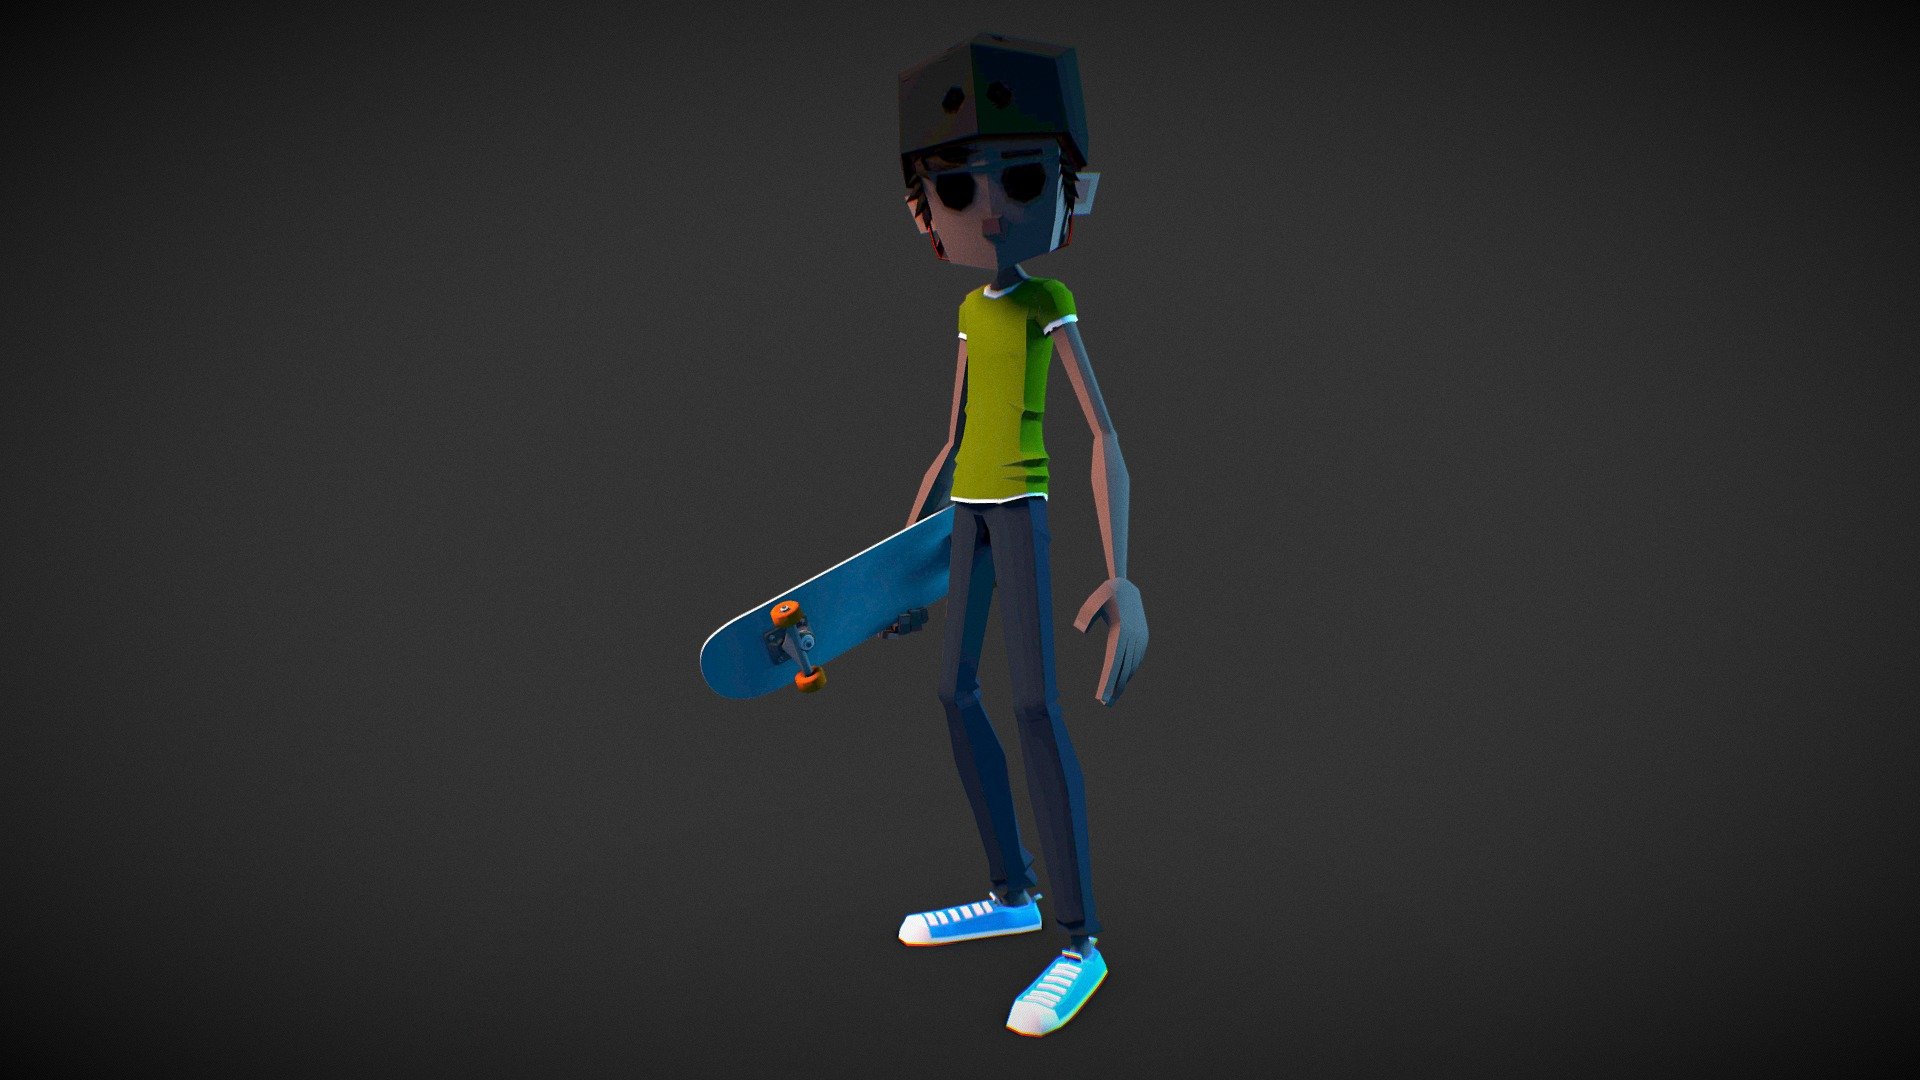 This is one of the characters in development for Pocket Skate

Thanks, for checking it out!
- Pete - Ollie - Pocket Skate - 3D model by Pocket Skate! (@PocketSkate) 3d model